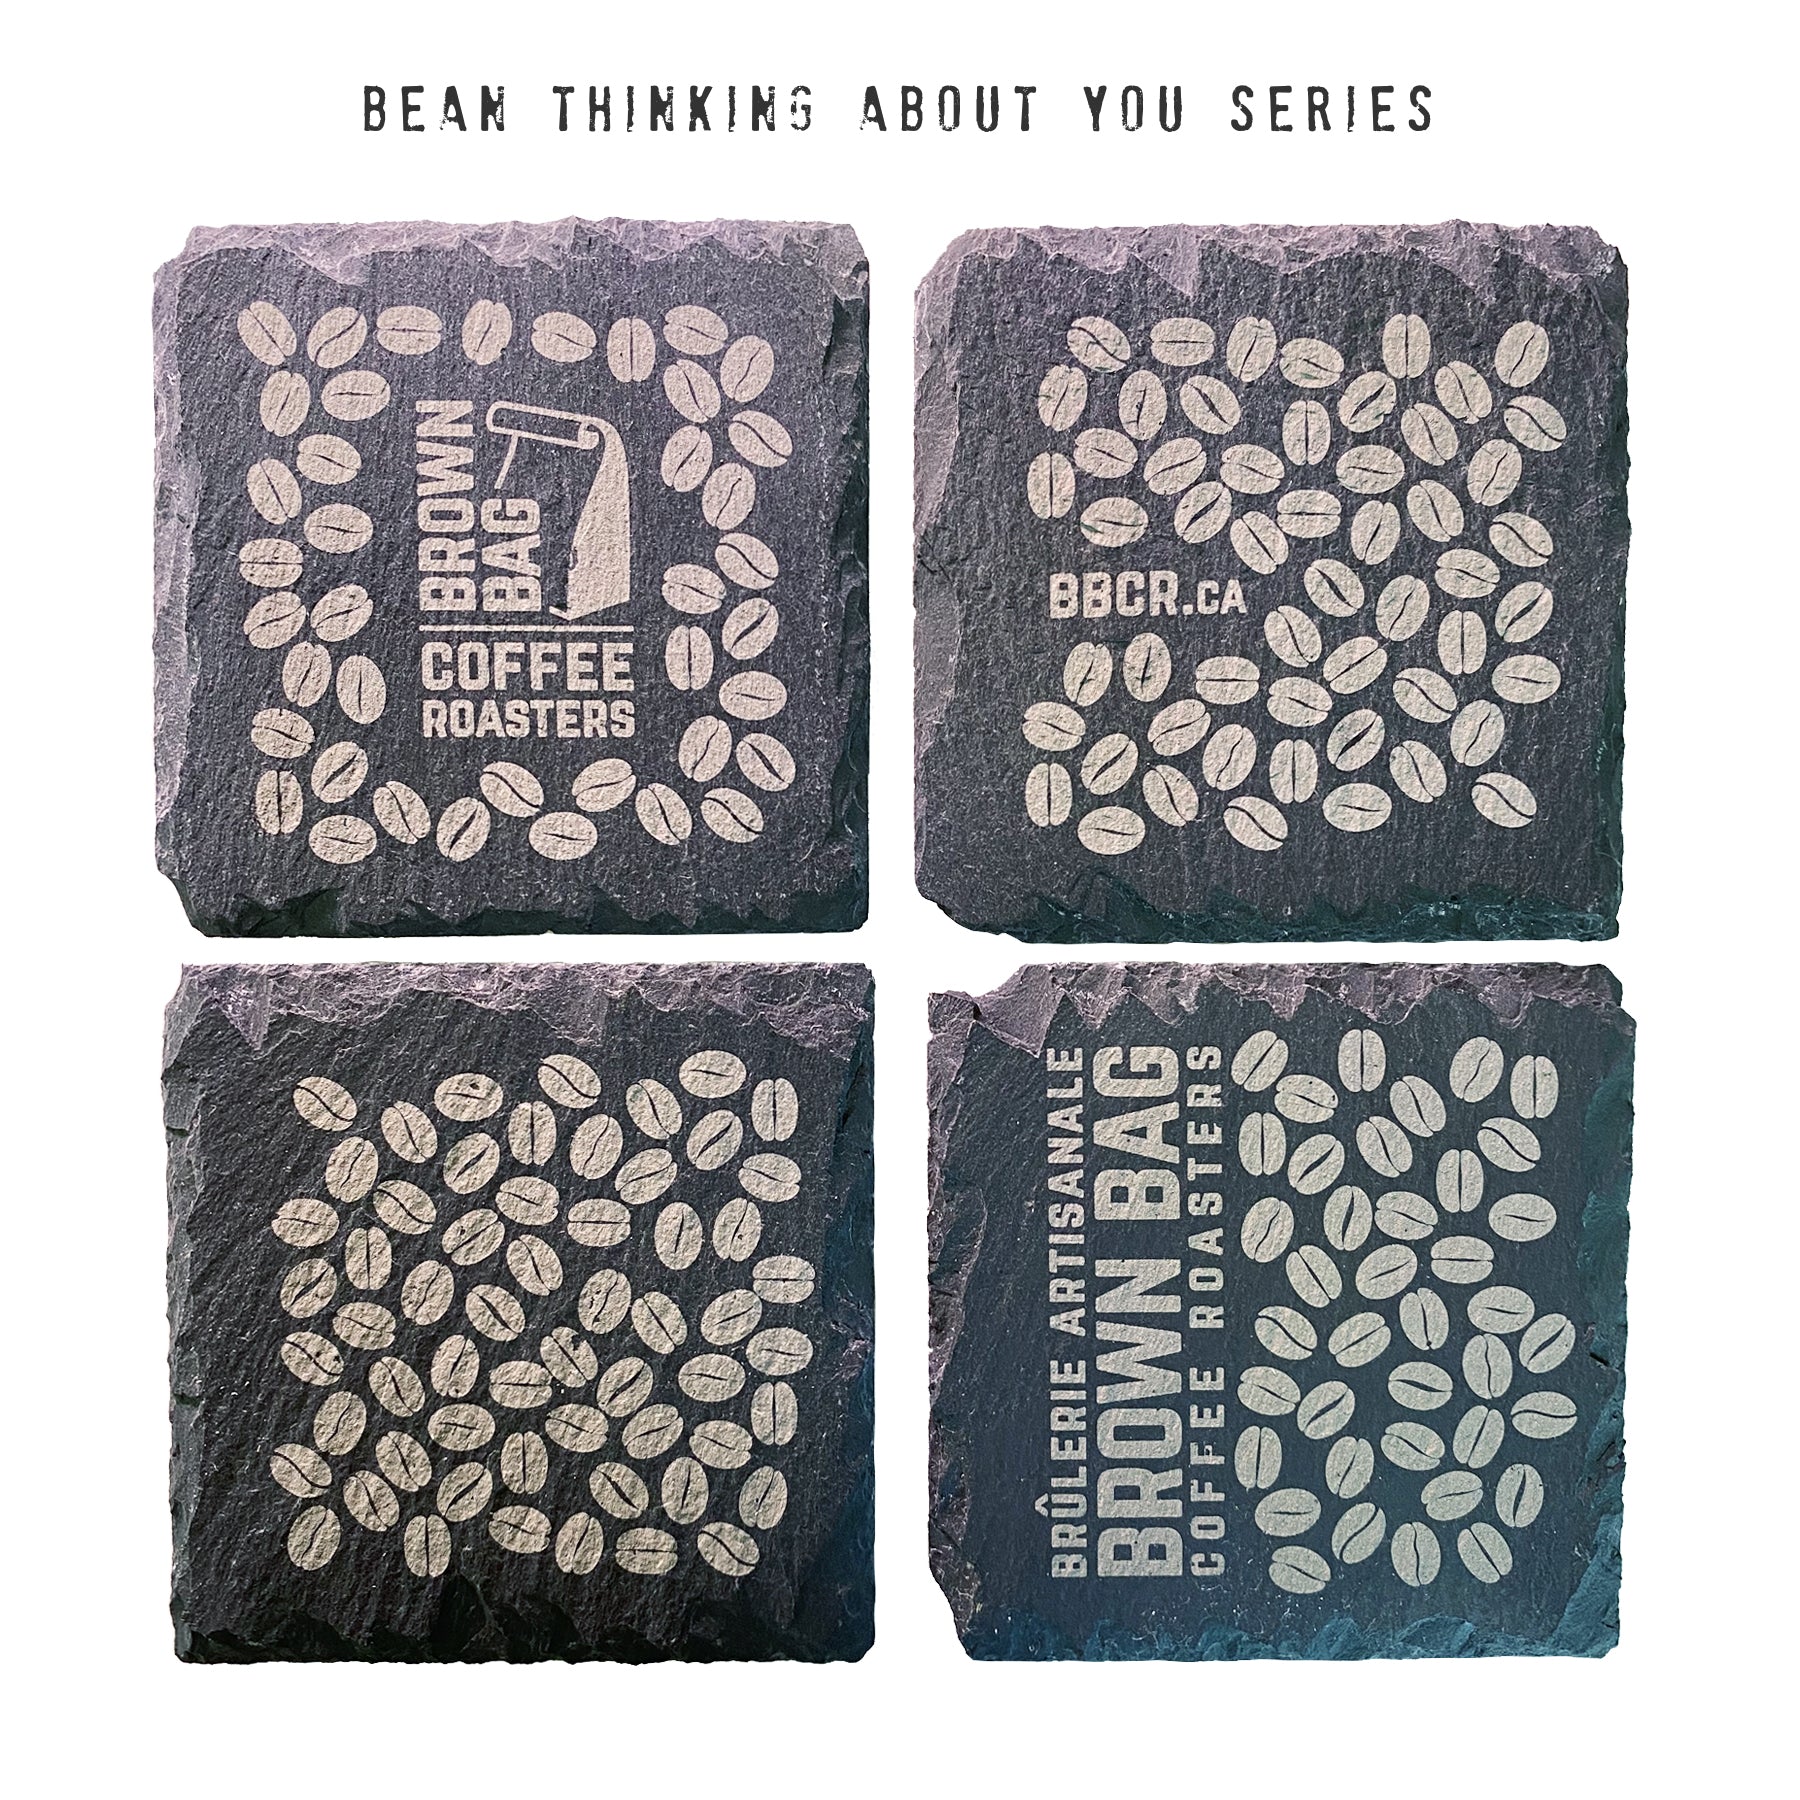 Bean Thinking About You Series